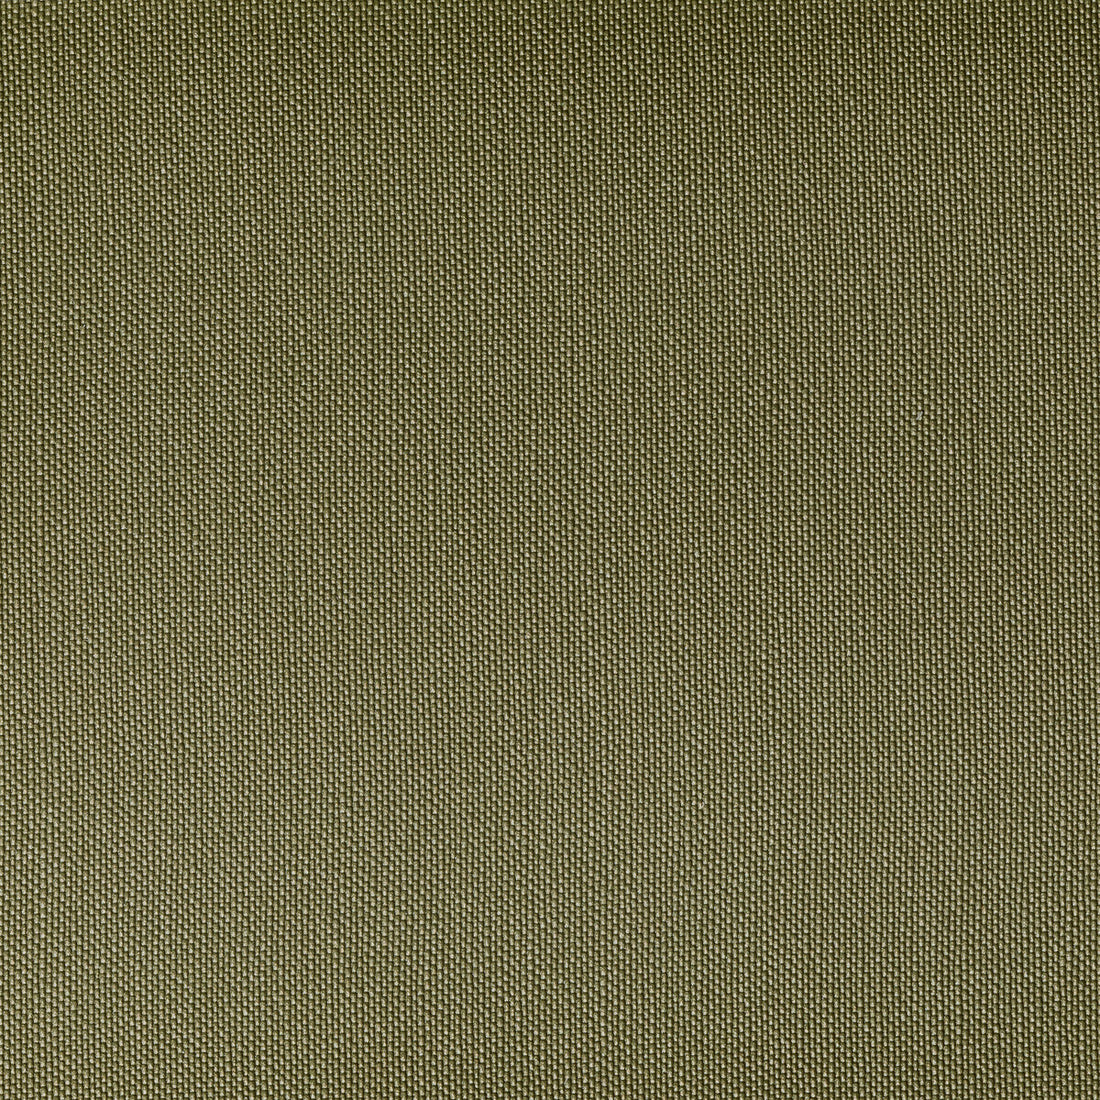 Ventura fabric in willow color - pattern VENTURA.130.0 - by Kravet Contract in the Foundations / Value collection